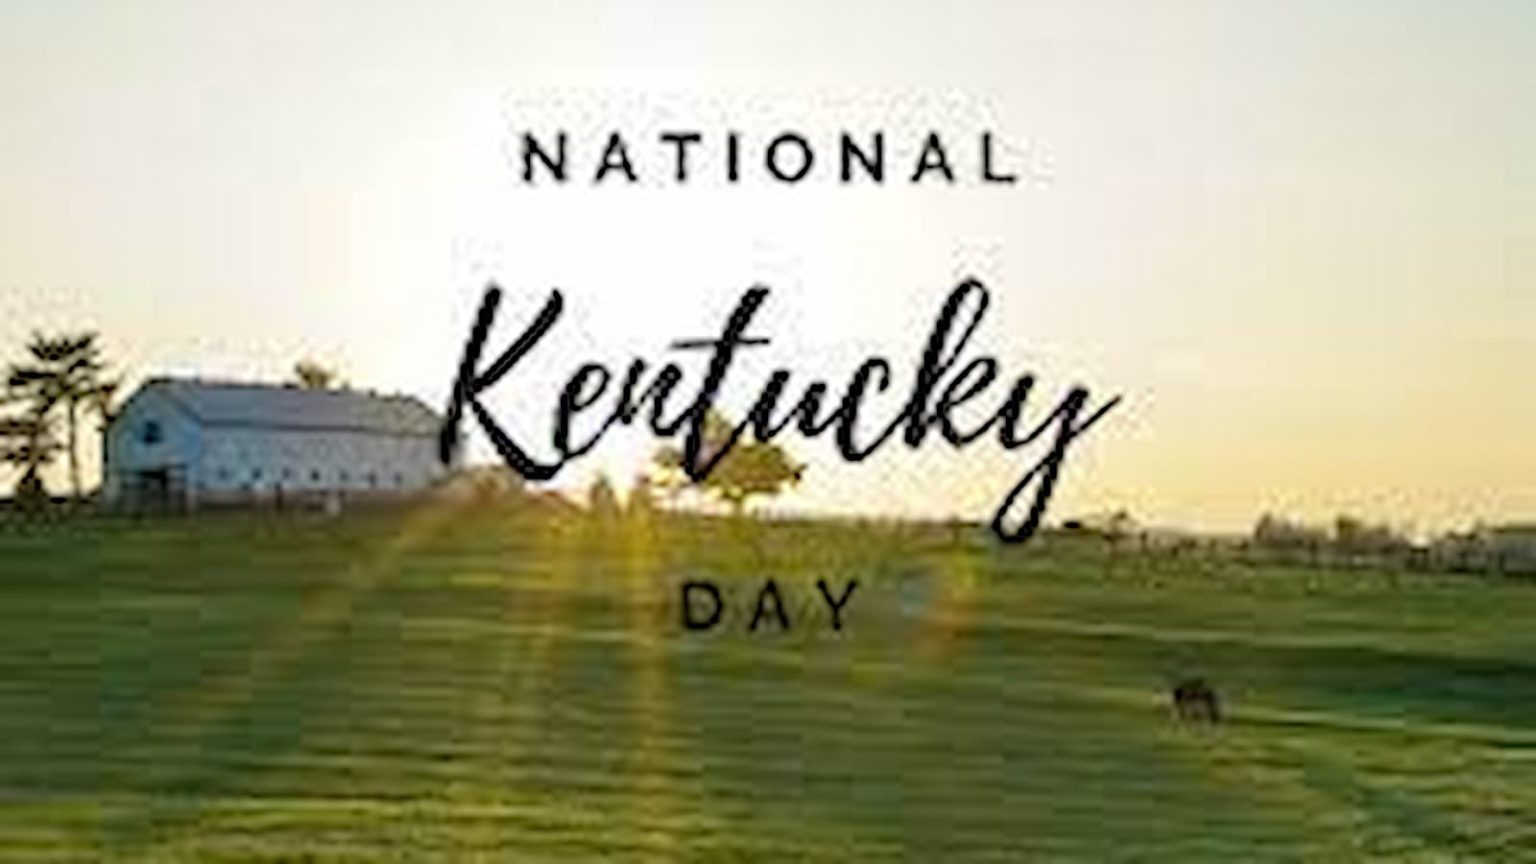 National Kentucky Day Quotes, Wishes And Messages